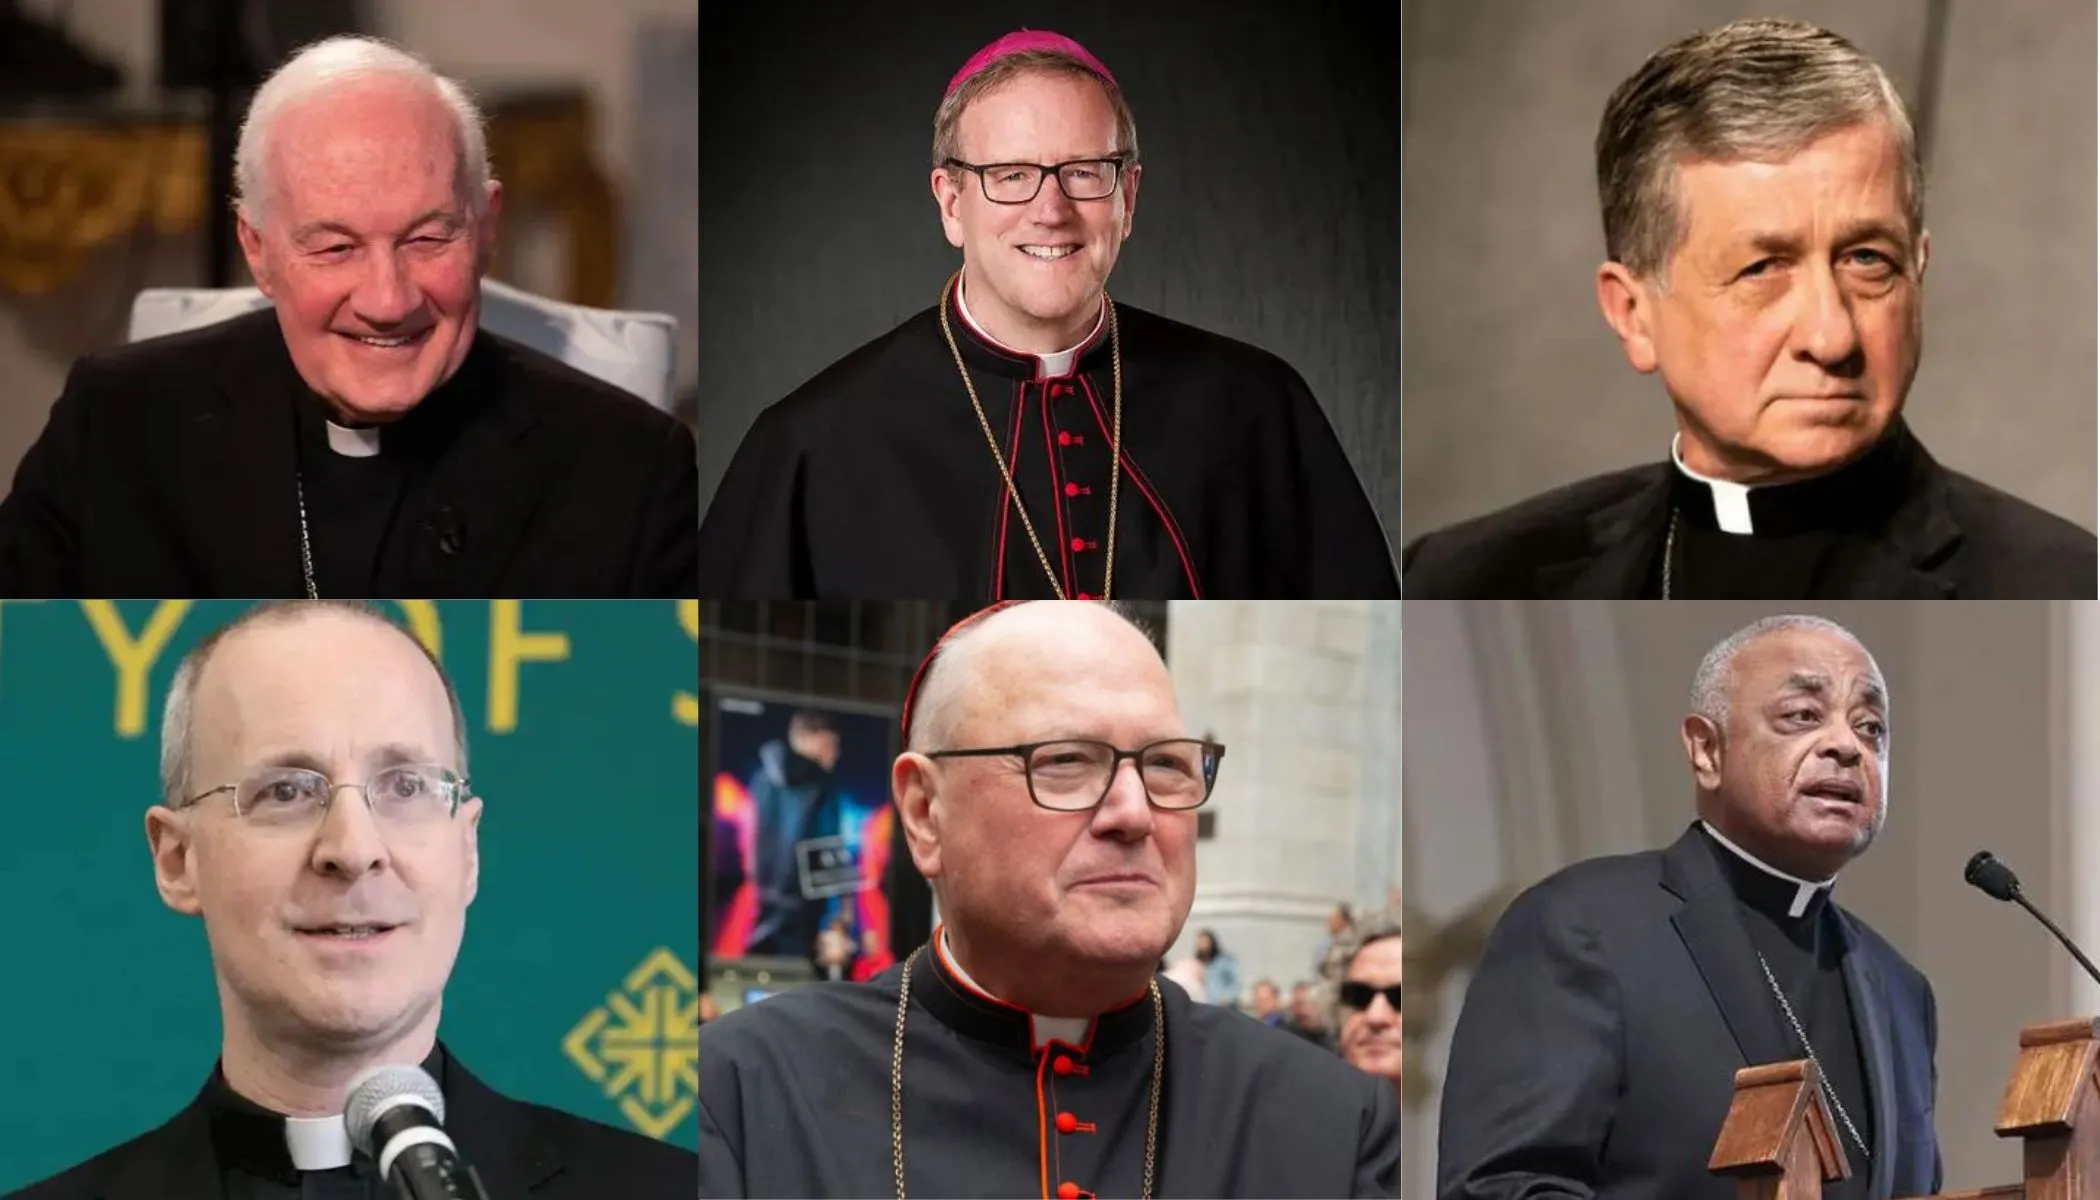 Top From Left to Right - Cardinal Marc Ouellet, Bishop Robert Barron, Cardinal Blase Cupich
Bottom From Left to Right - Father James Martin, Cardinal Timothy Dolan, Cardinal Wilton Gregory?w=200&h=150